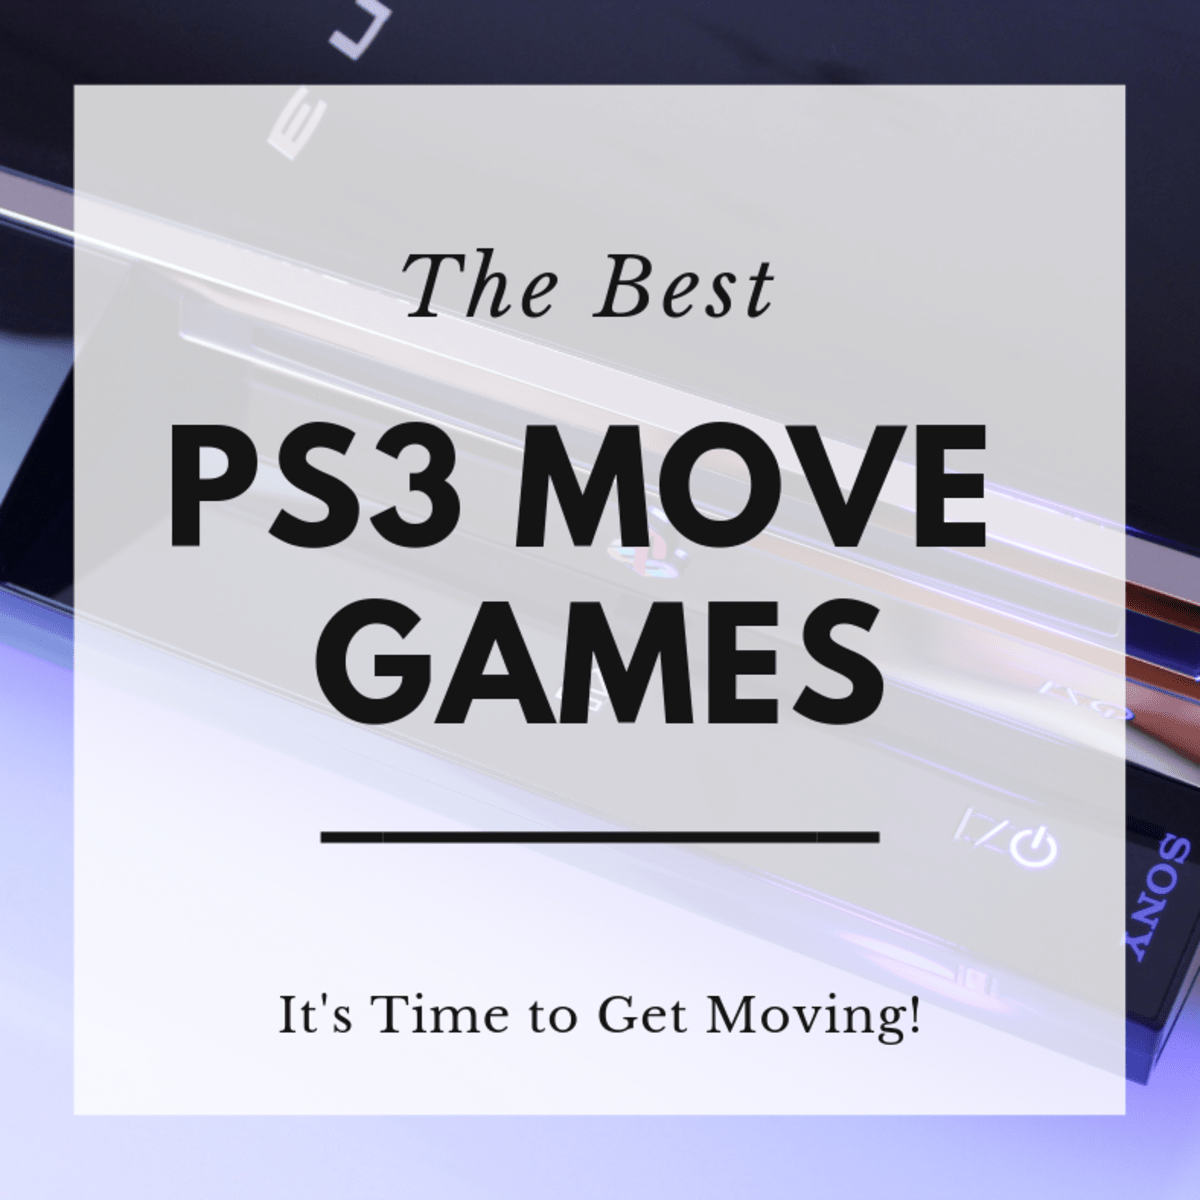 sony ps3 move